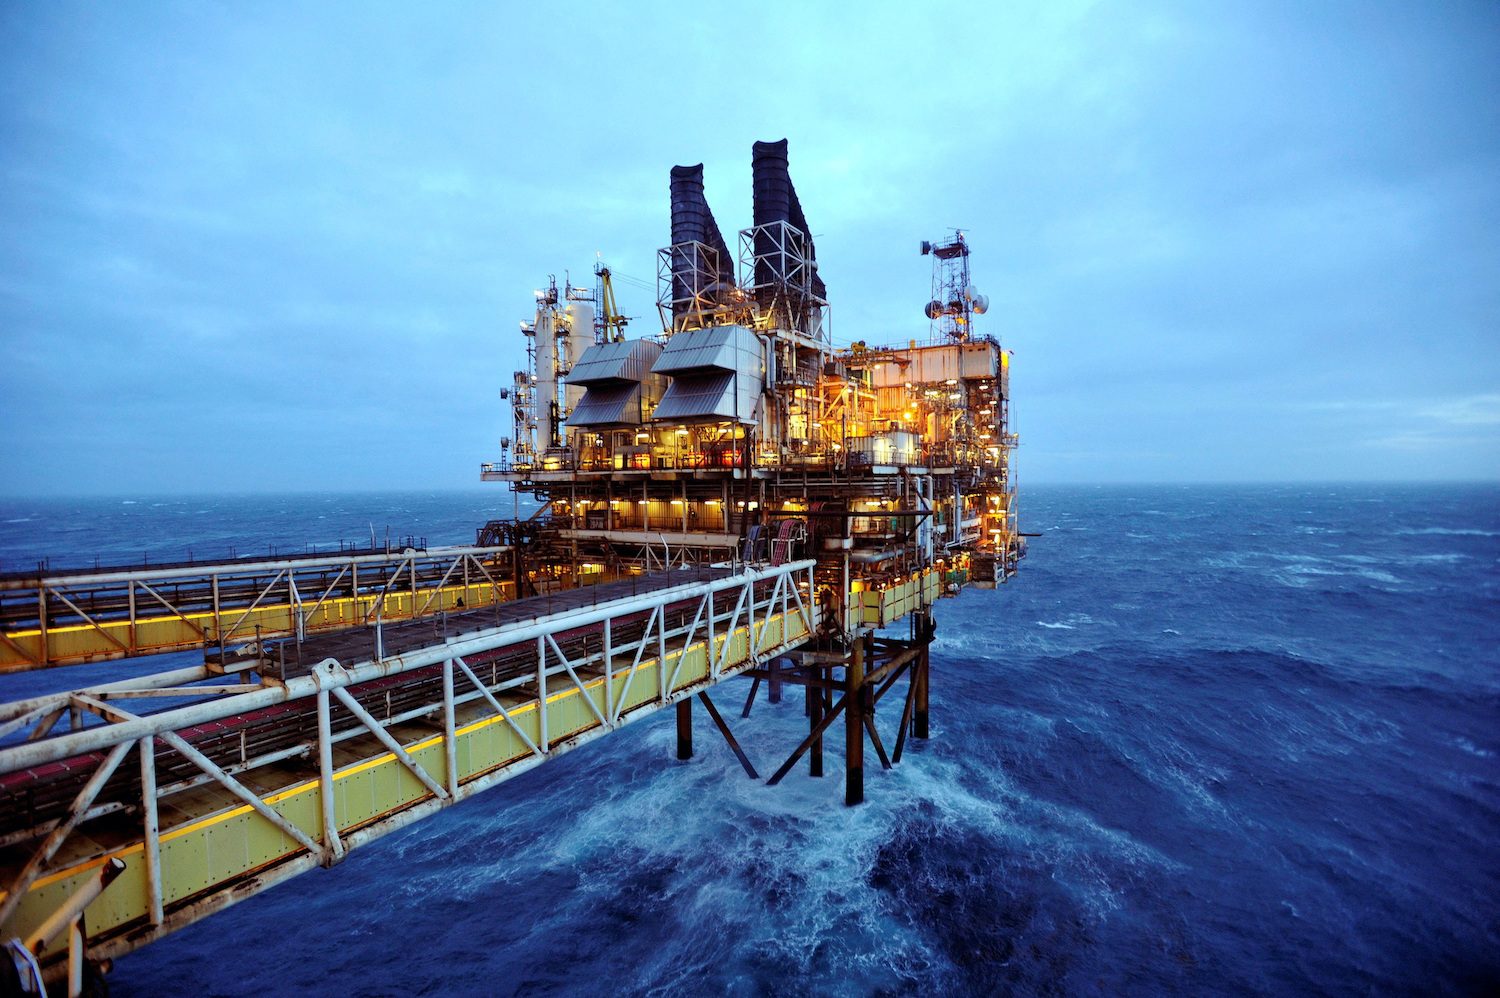 UK oil and gas producers call for more investment to ease energy crunch